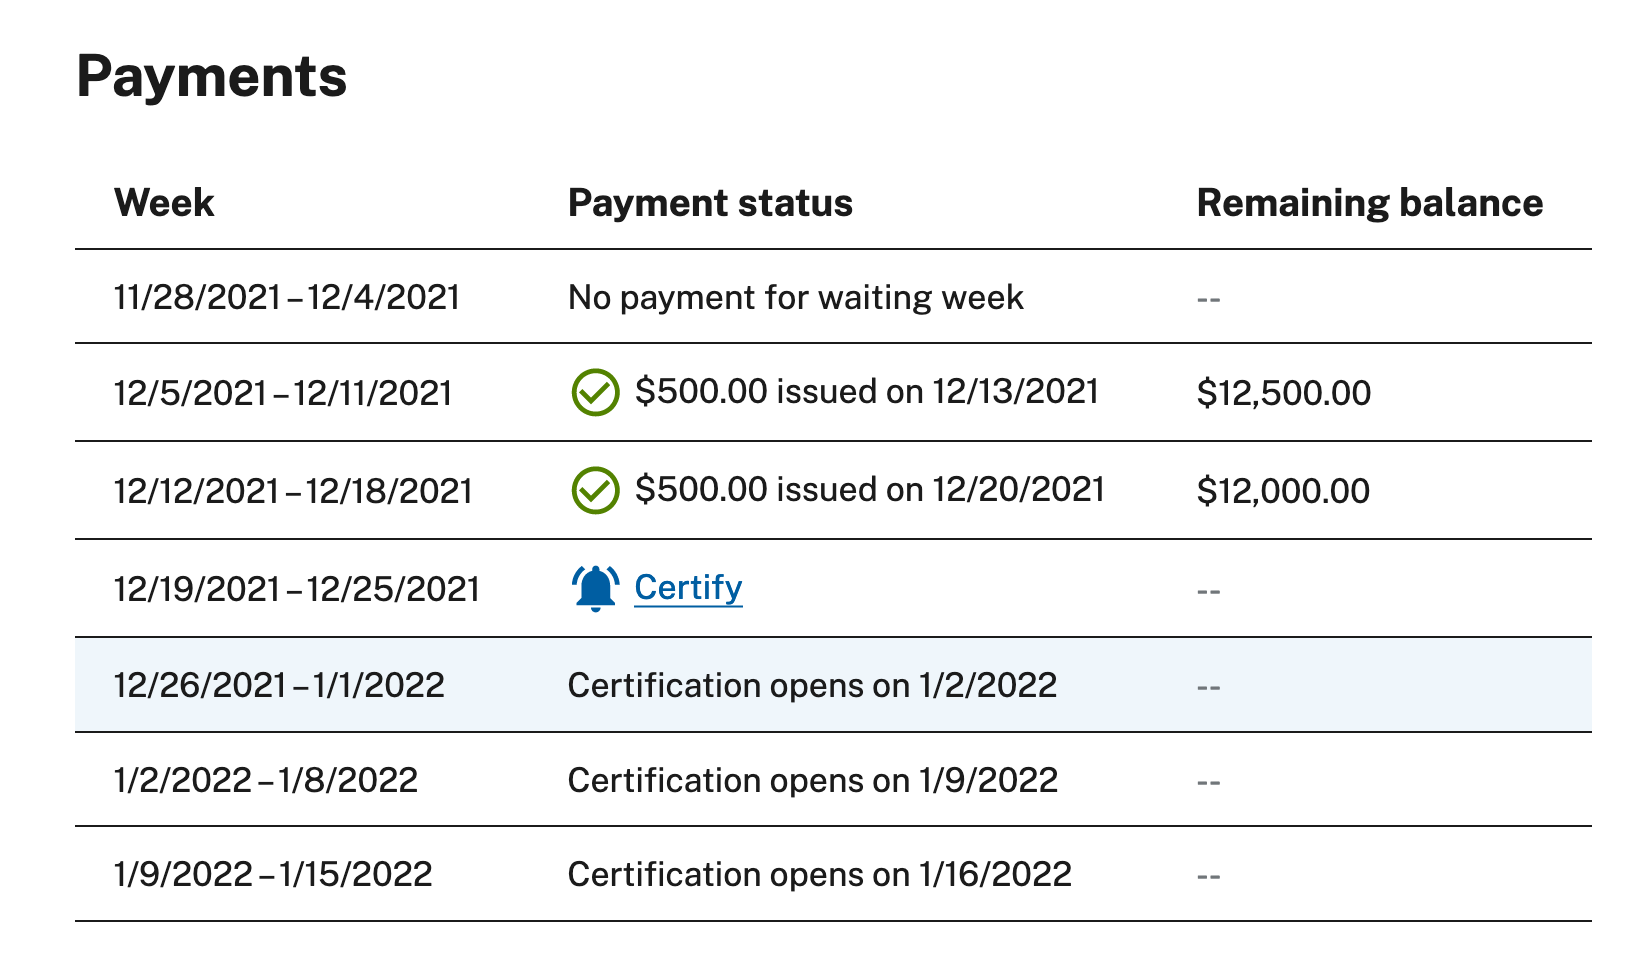 Screenshot of example payments table with columns for 'week', 'payment status', and 'remaining balance'